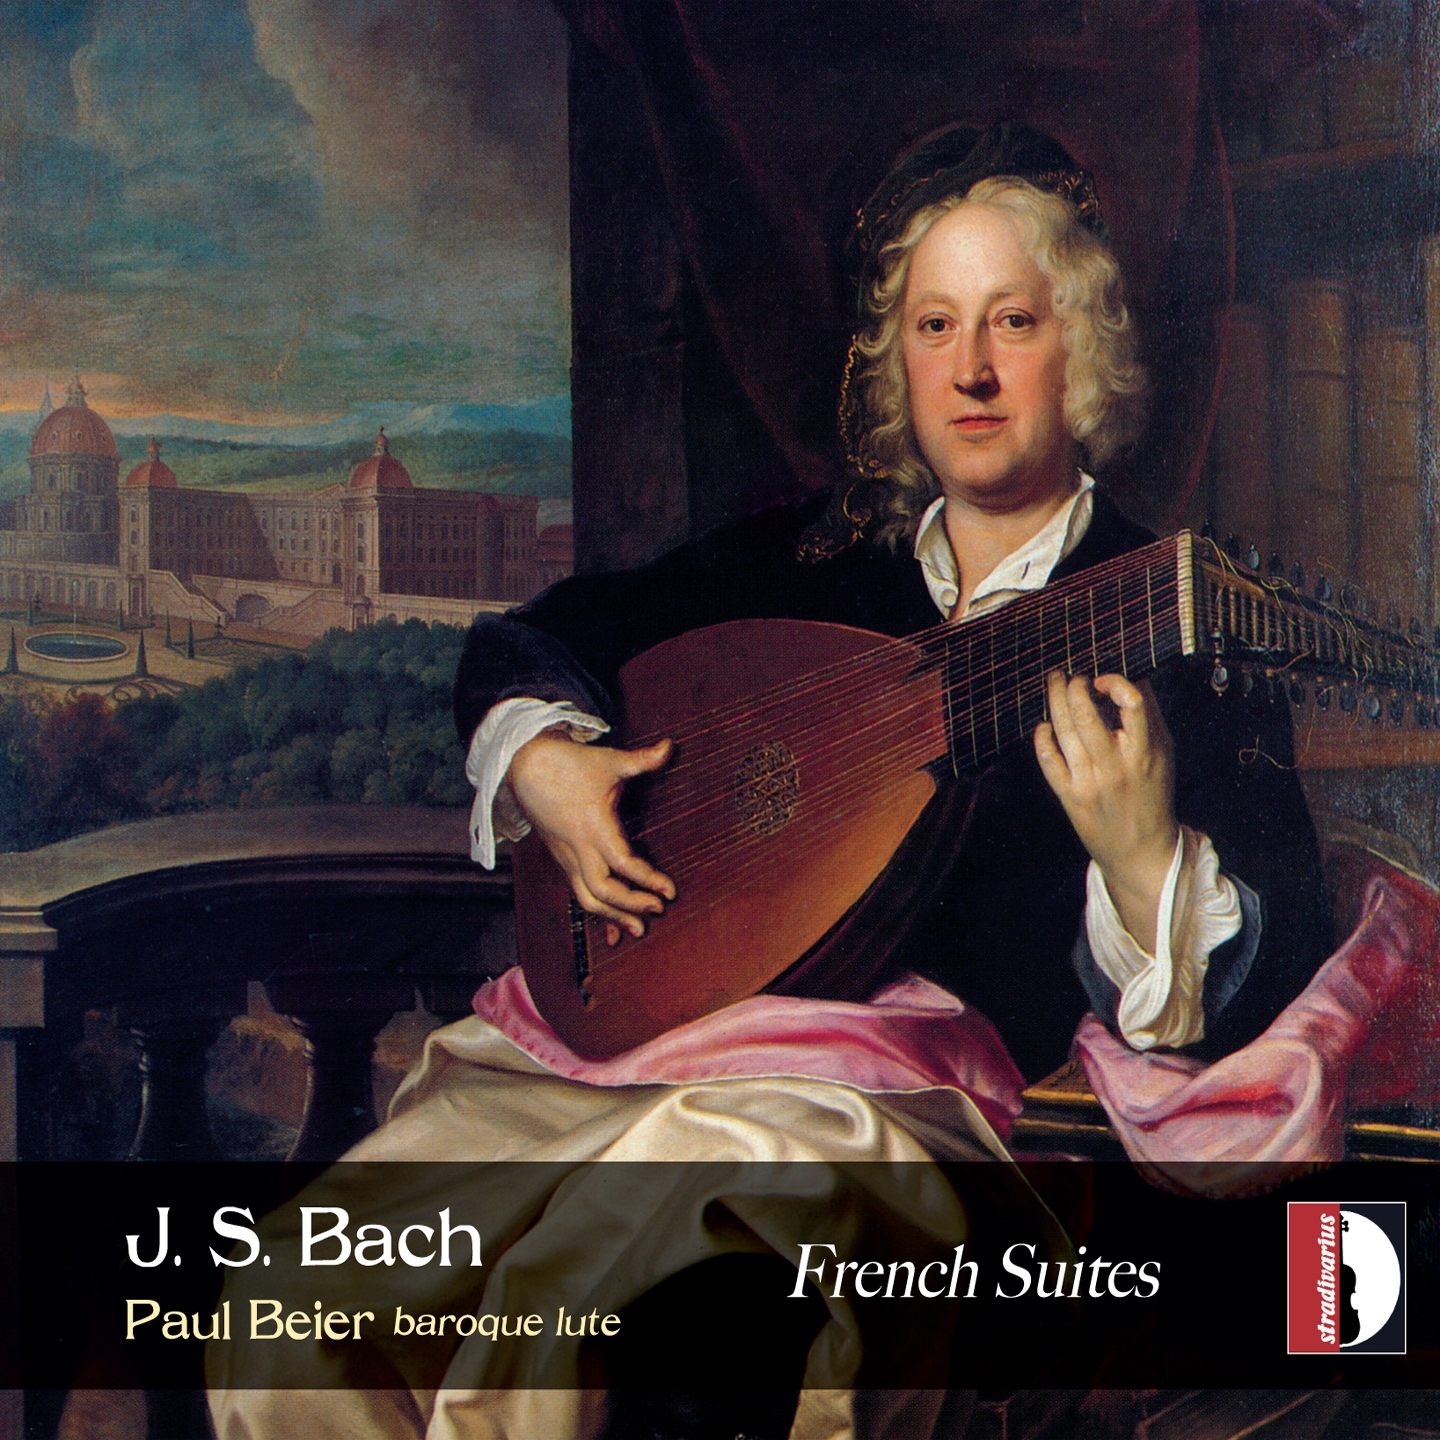 6 French Suites, No. 3 in B-Flat Minor, BWV 814: III. Sarabande (Transcription for Lute)